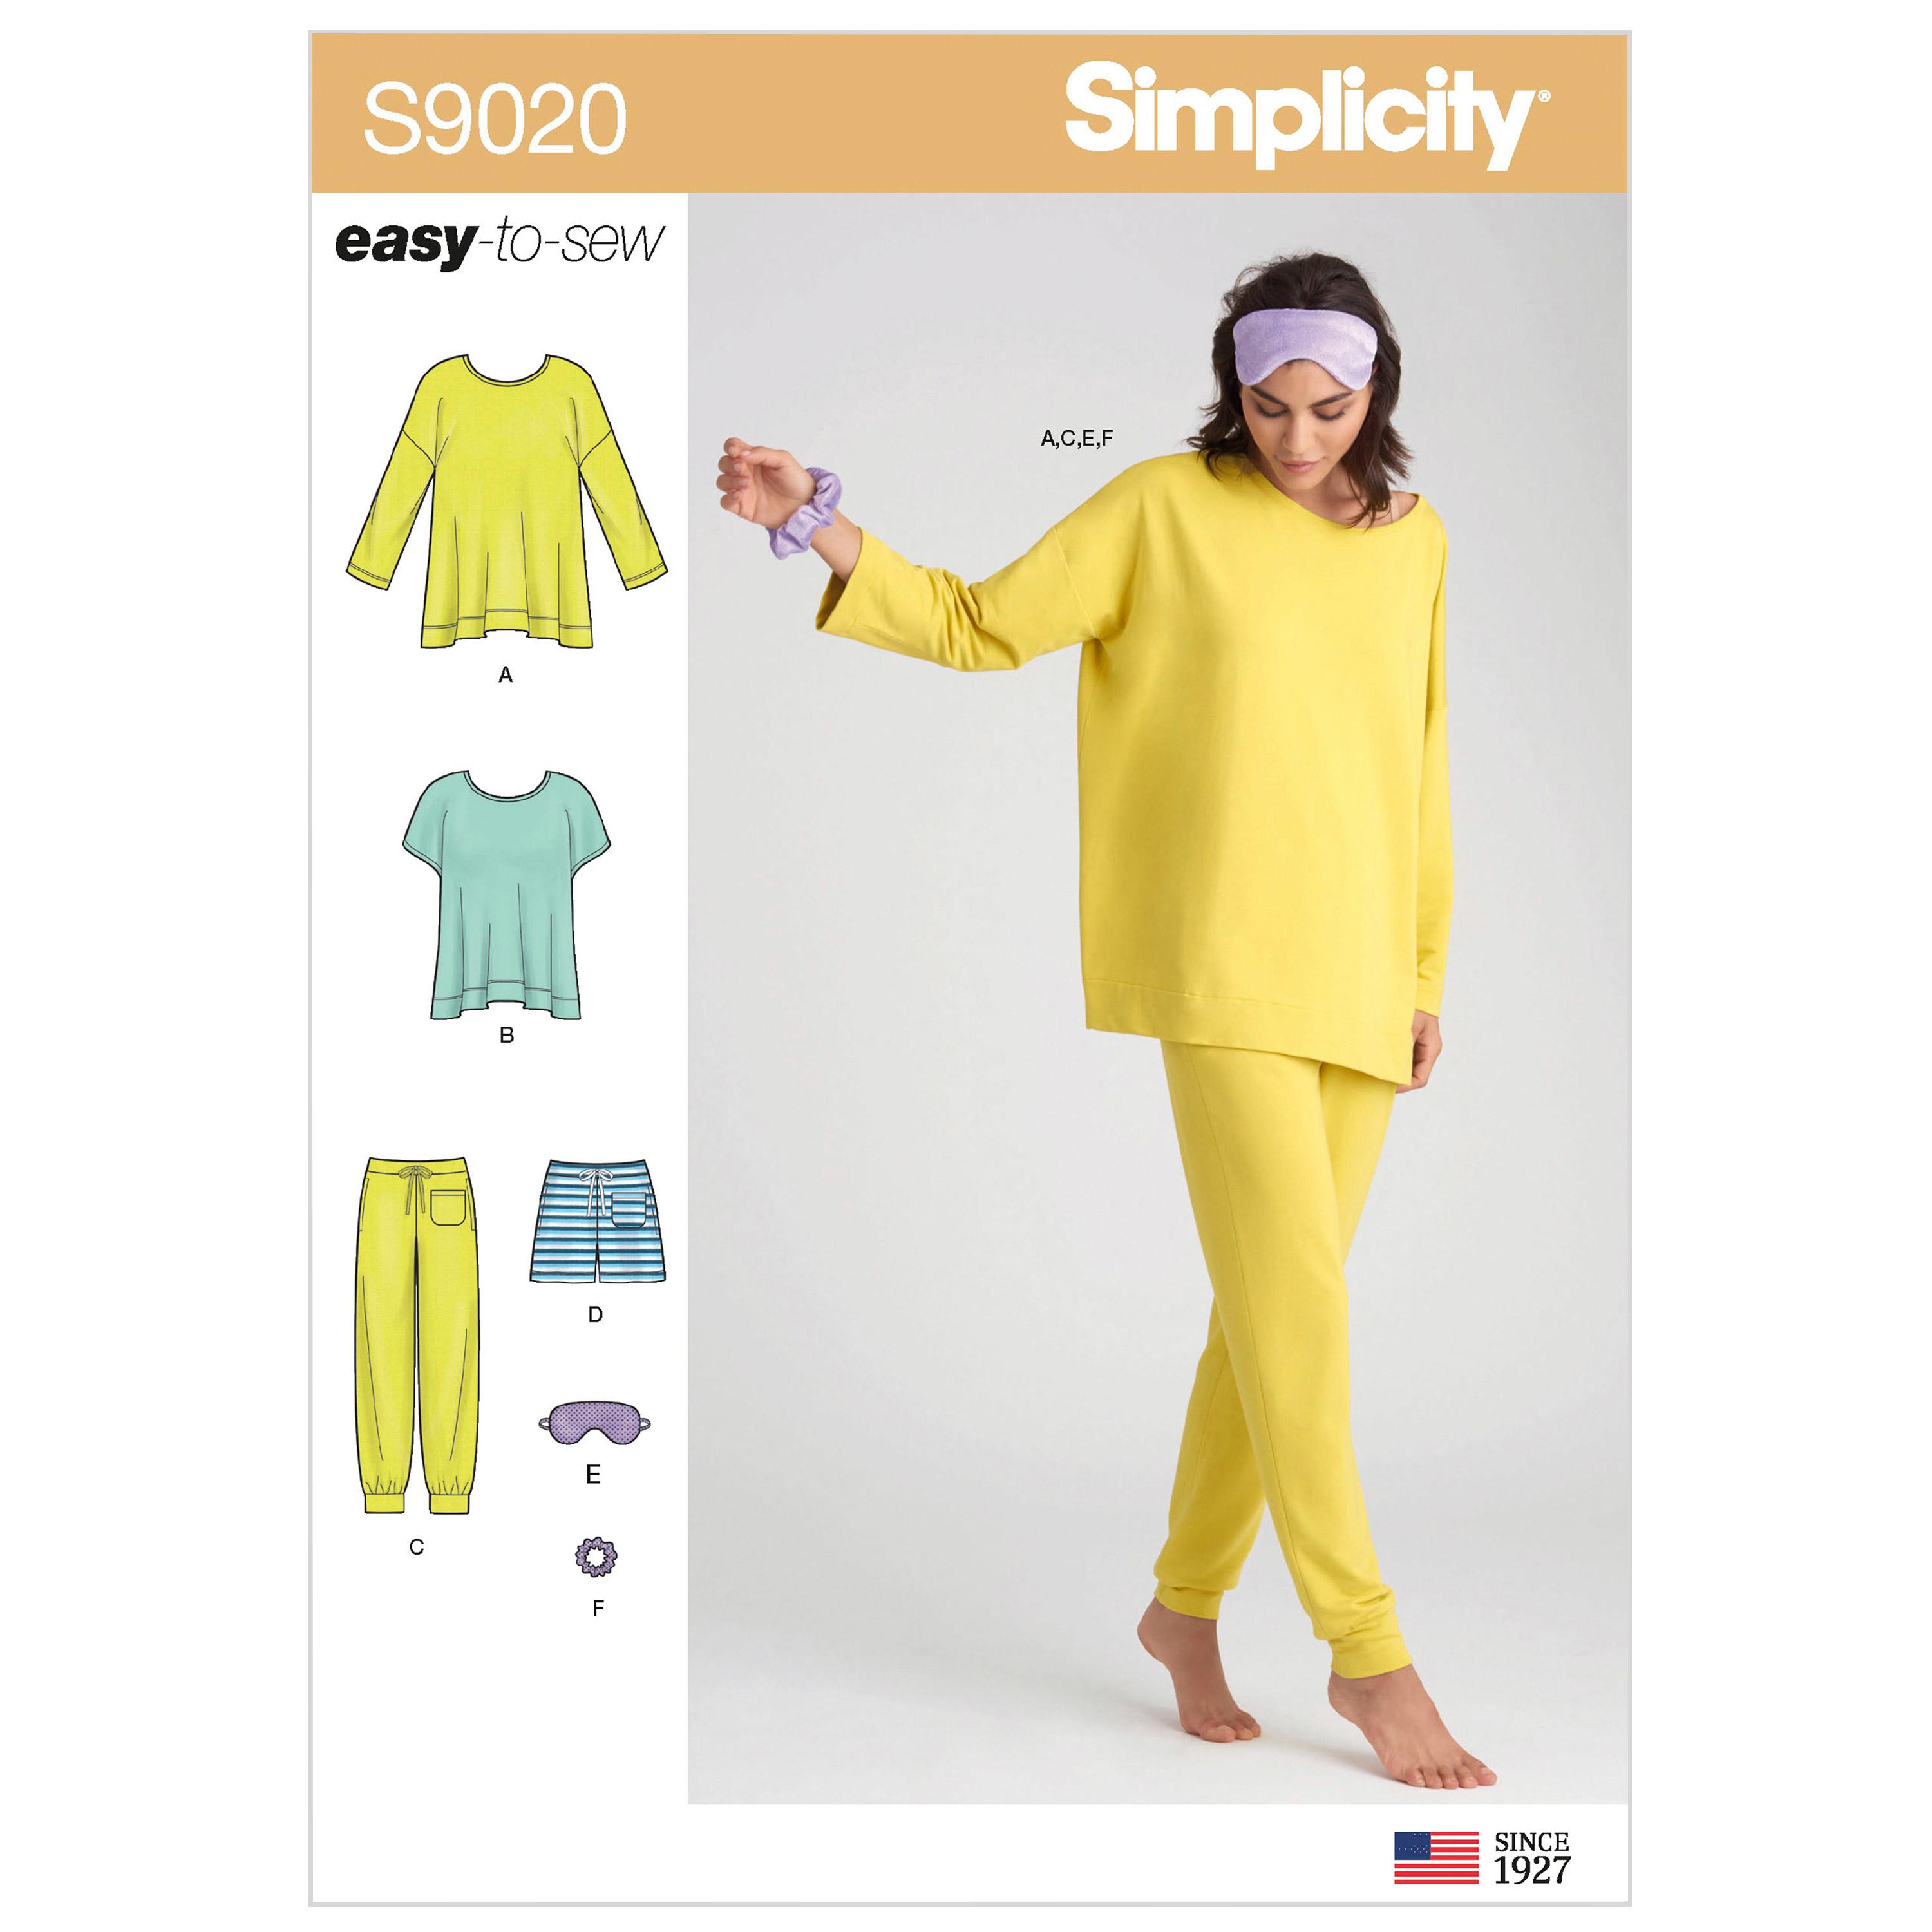 Simplicity S9020 Misses' Sleepwear Knit Tops, Pants, Shorts & Accessories